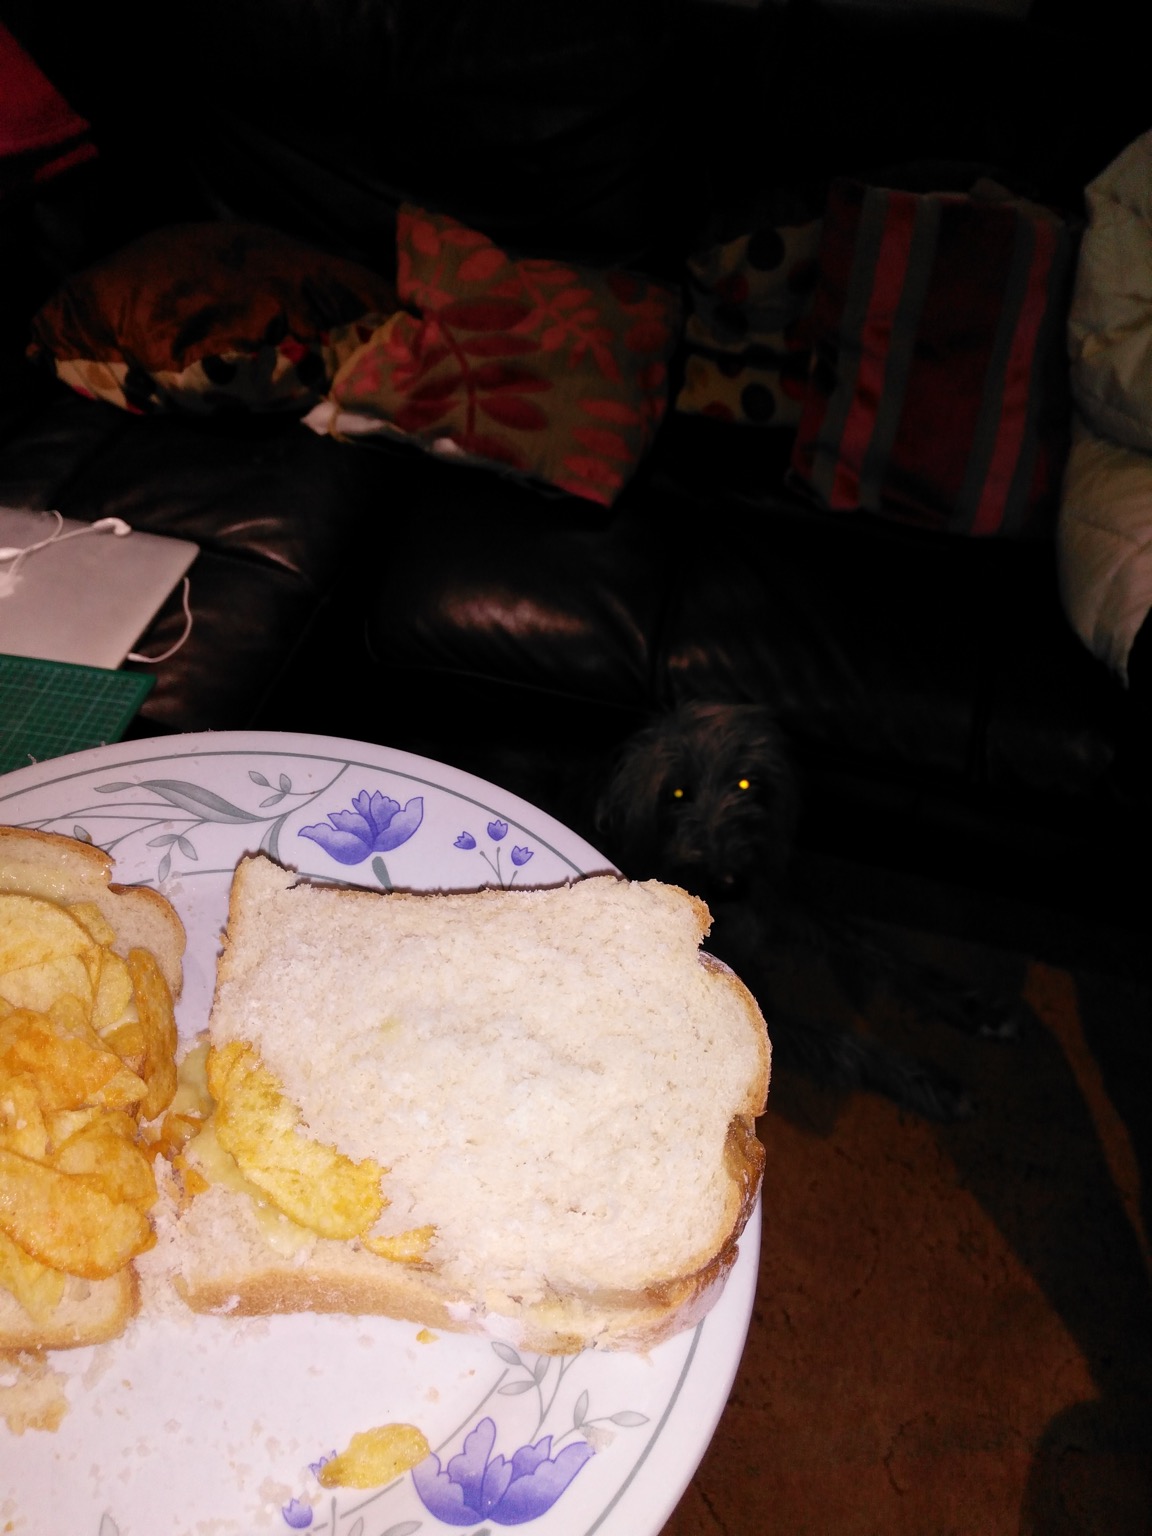 Flash photo of sandwich and mysterious beast